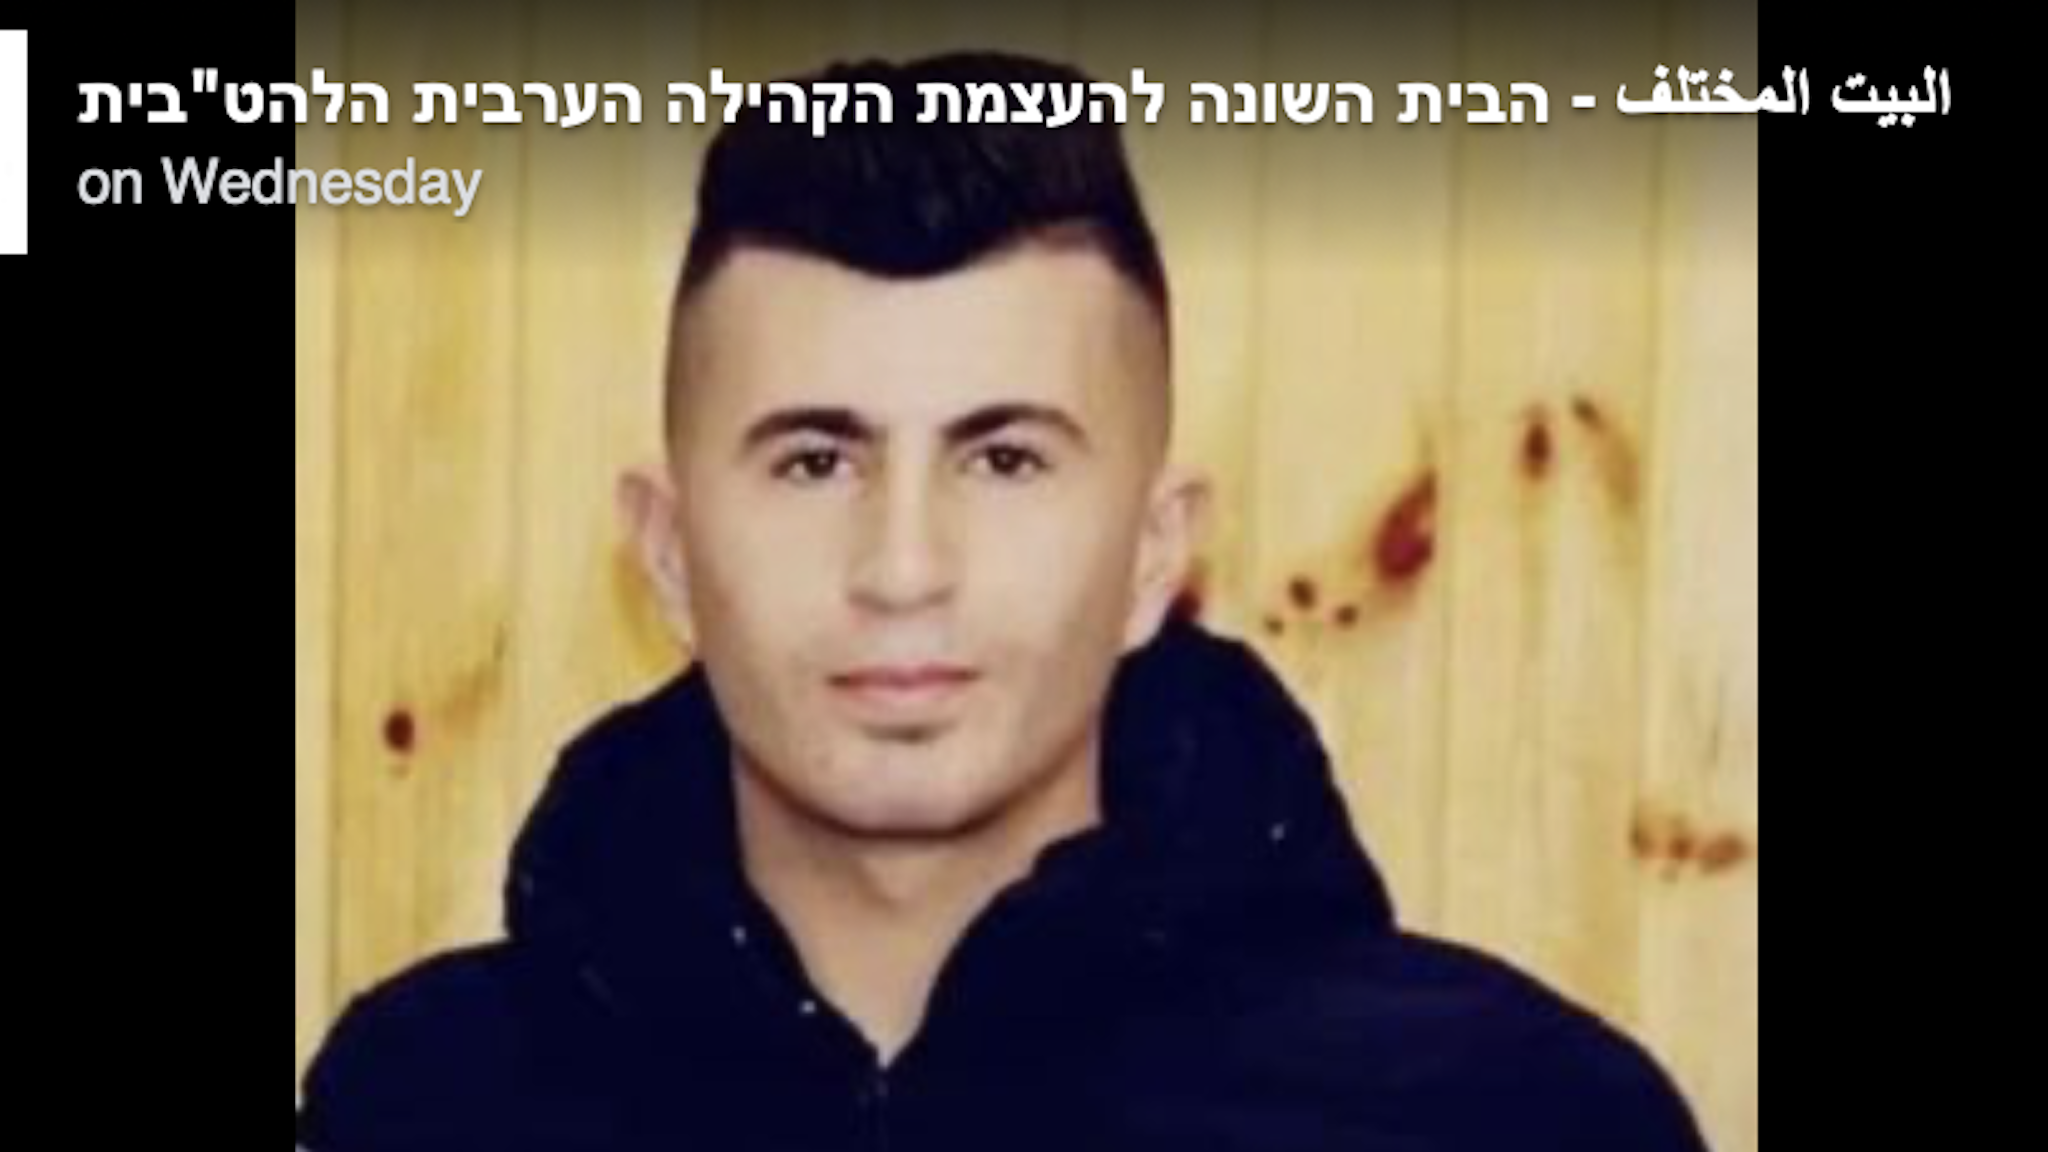 Gruesome footage of Ahmad Hacham Hamdi Abu Marakhia’s body being carried through the West Bank city of Hebron and then left dismembered on a roadside went viral on social media after his death Wednesday.